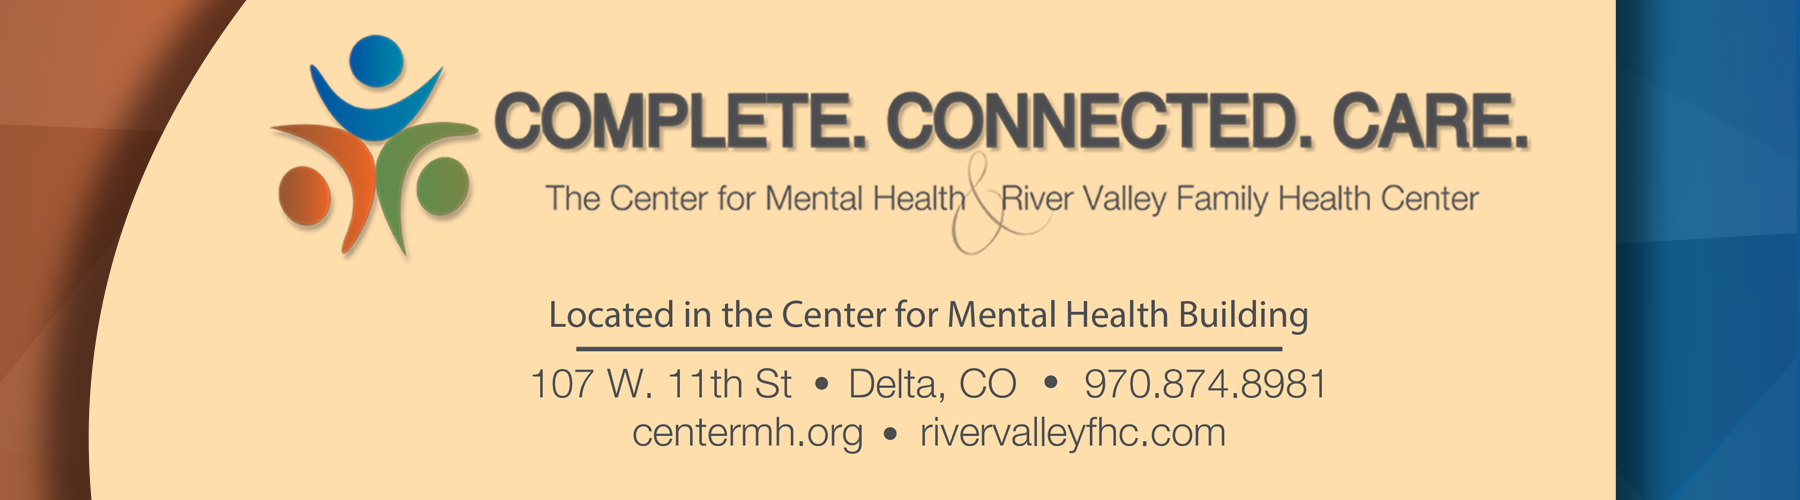 River Valley office space on Patient Forms & Resources page